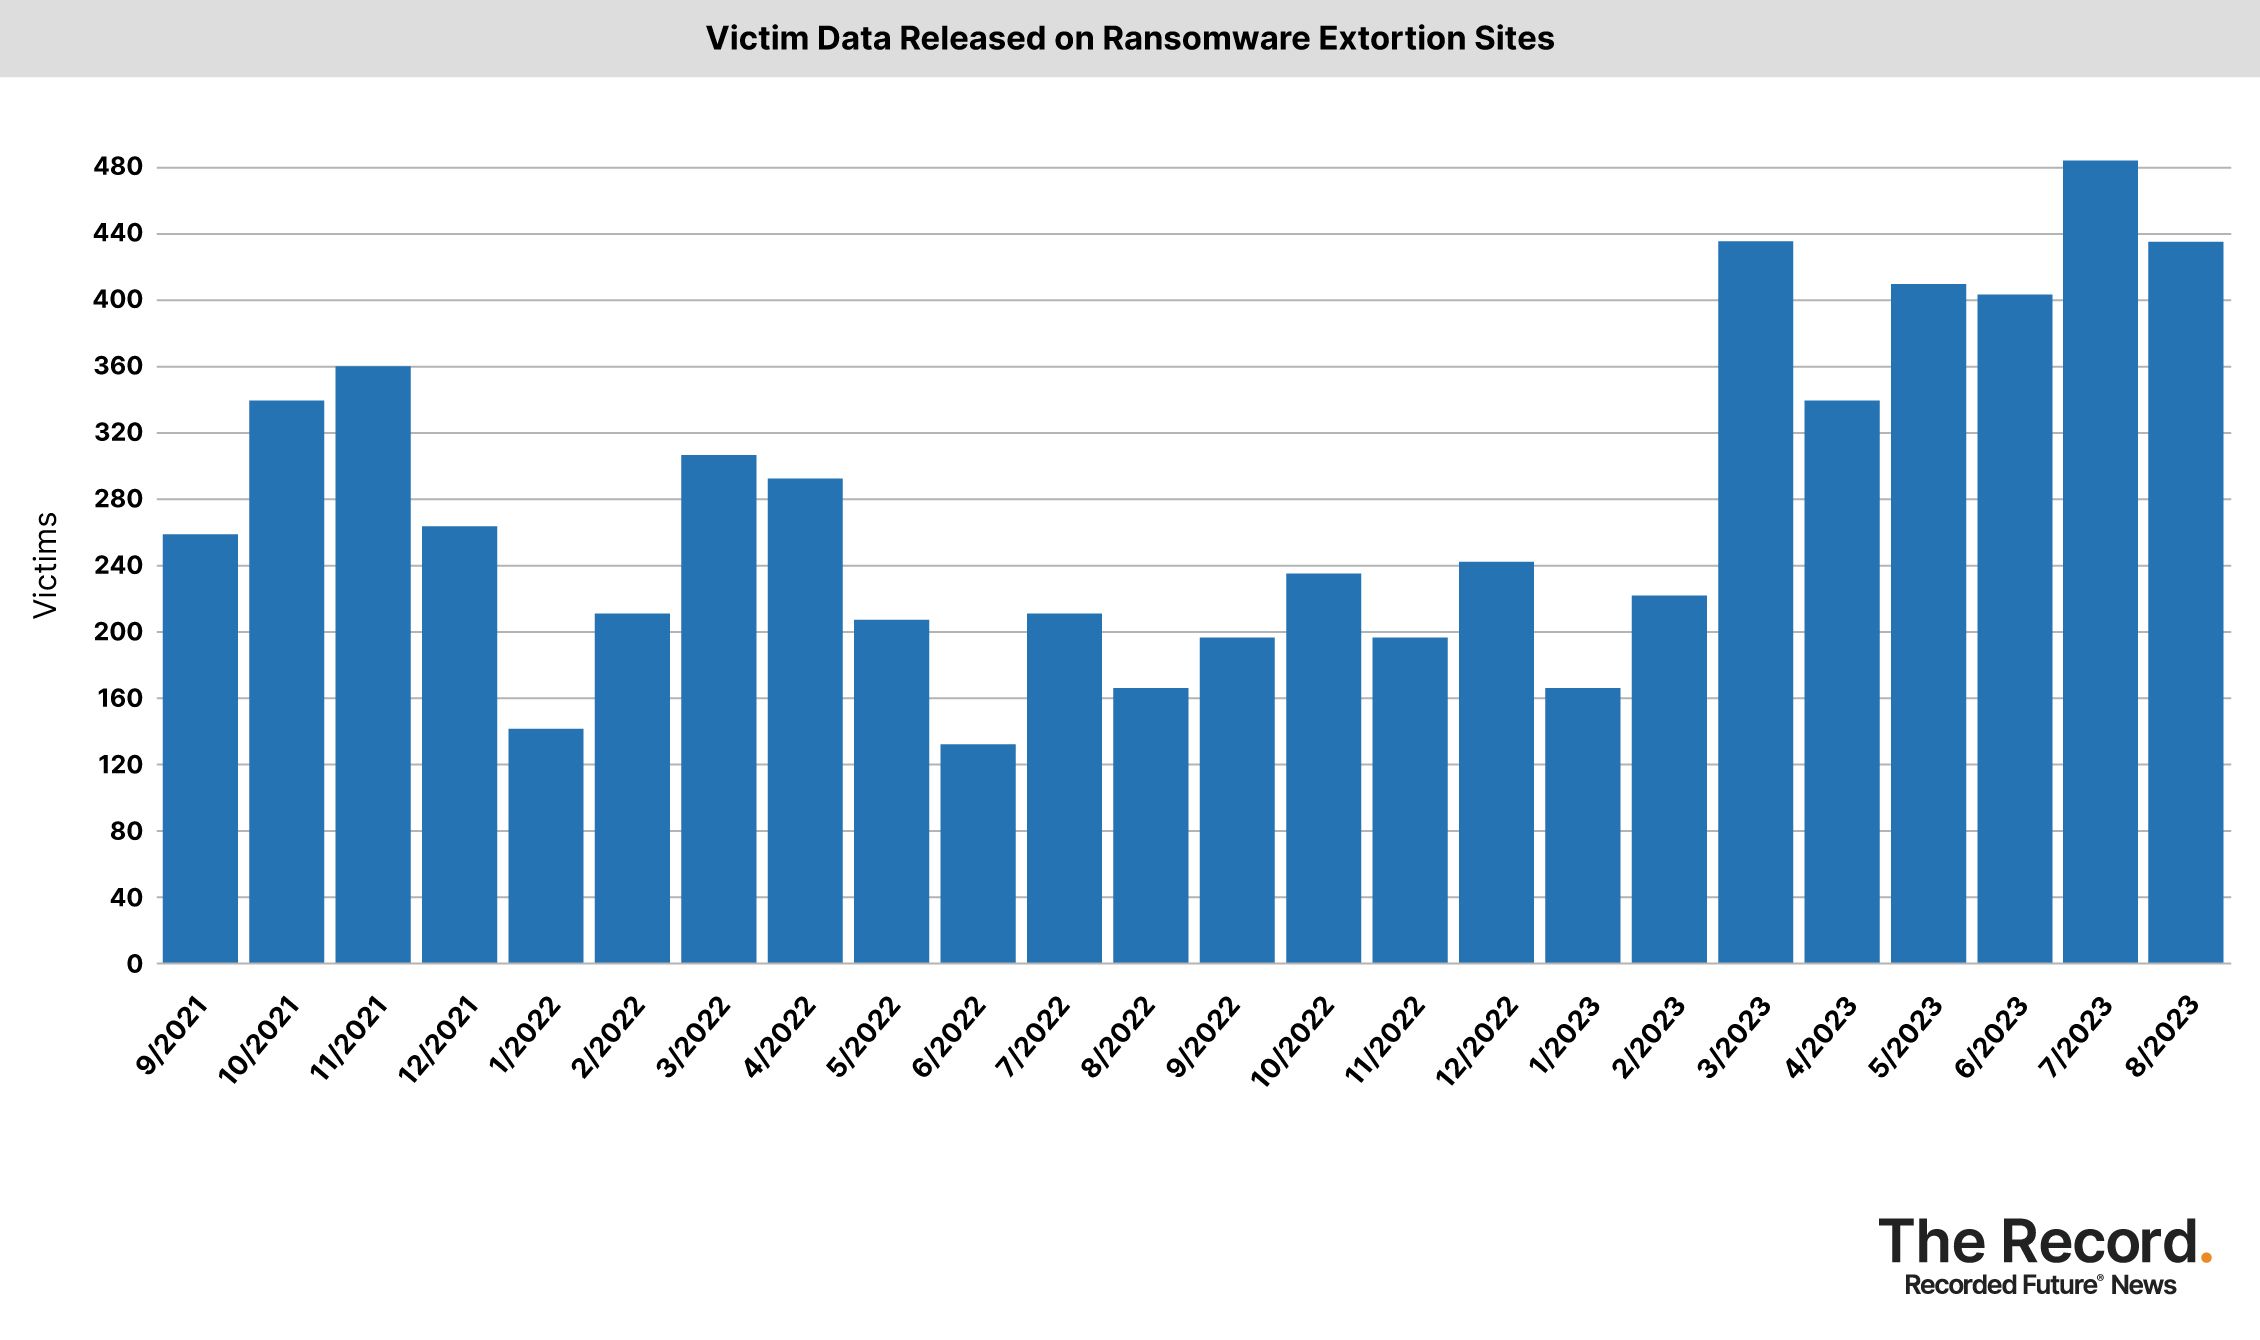 2023_0907 - Ransomware Tracker - Victim Data Released on Ransomware Extortion Sites.jpg